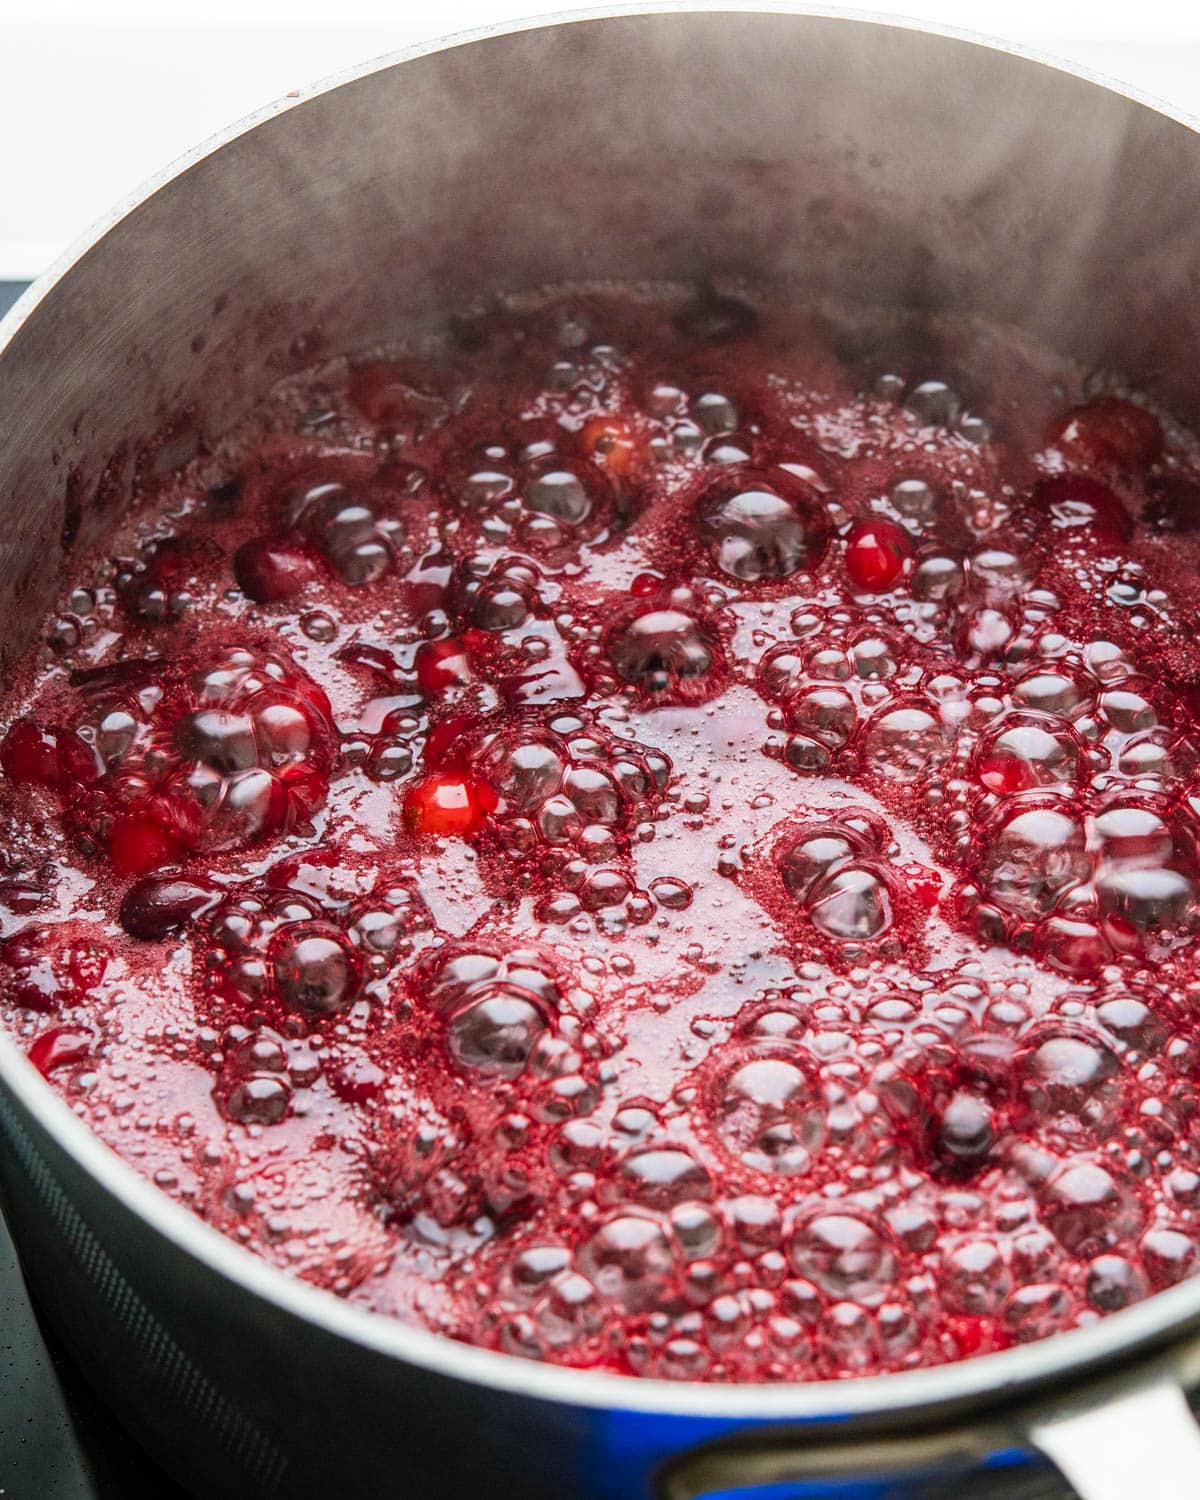 The cranberries will pop in the mulled wine as it simmers. 